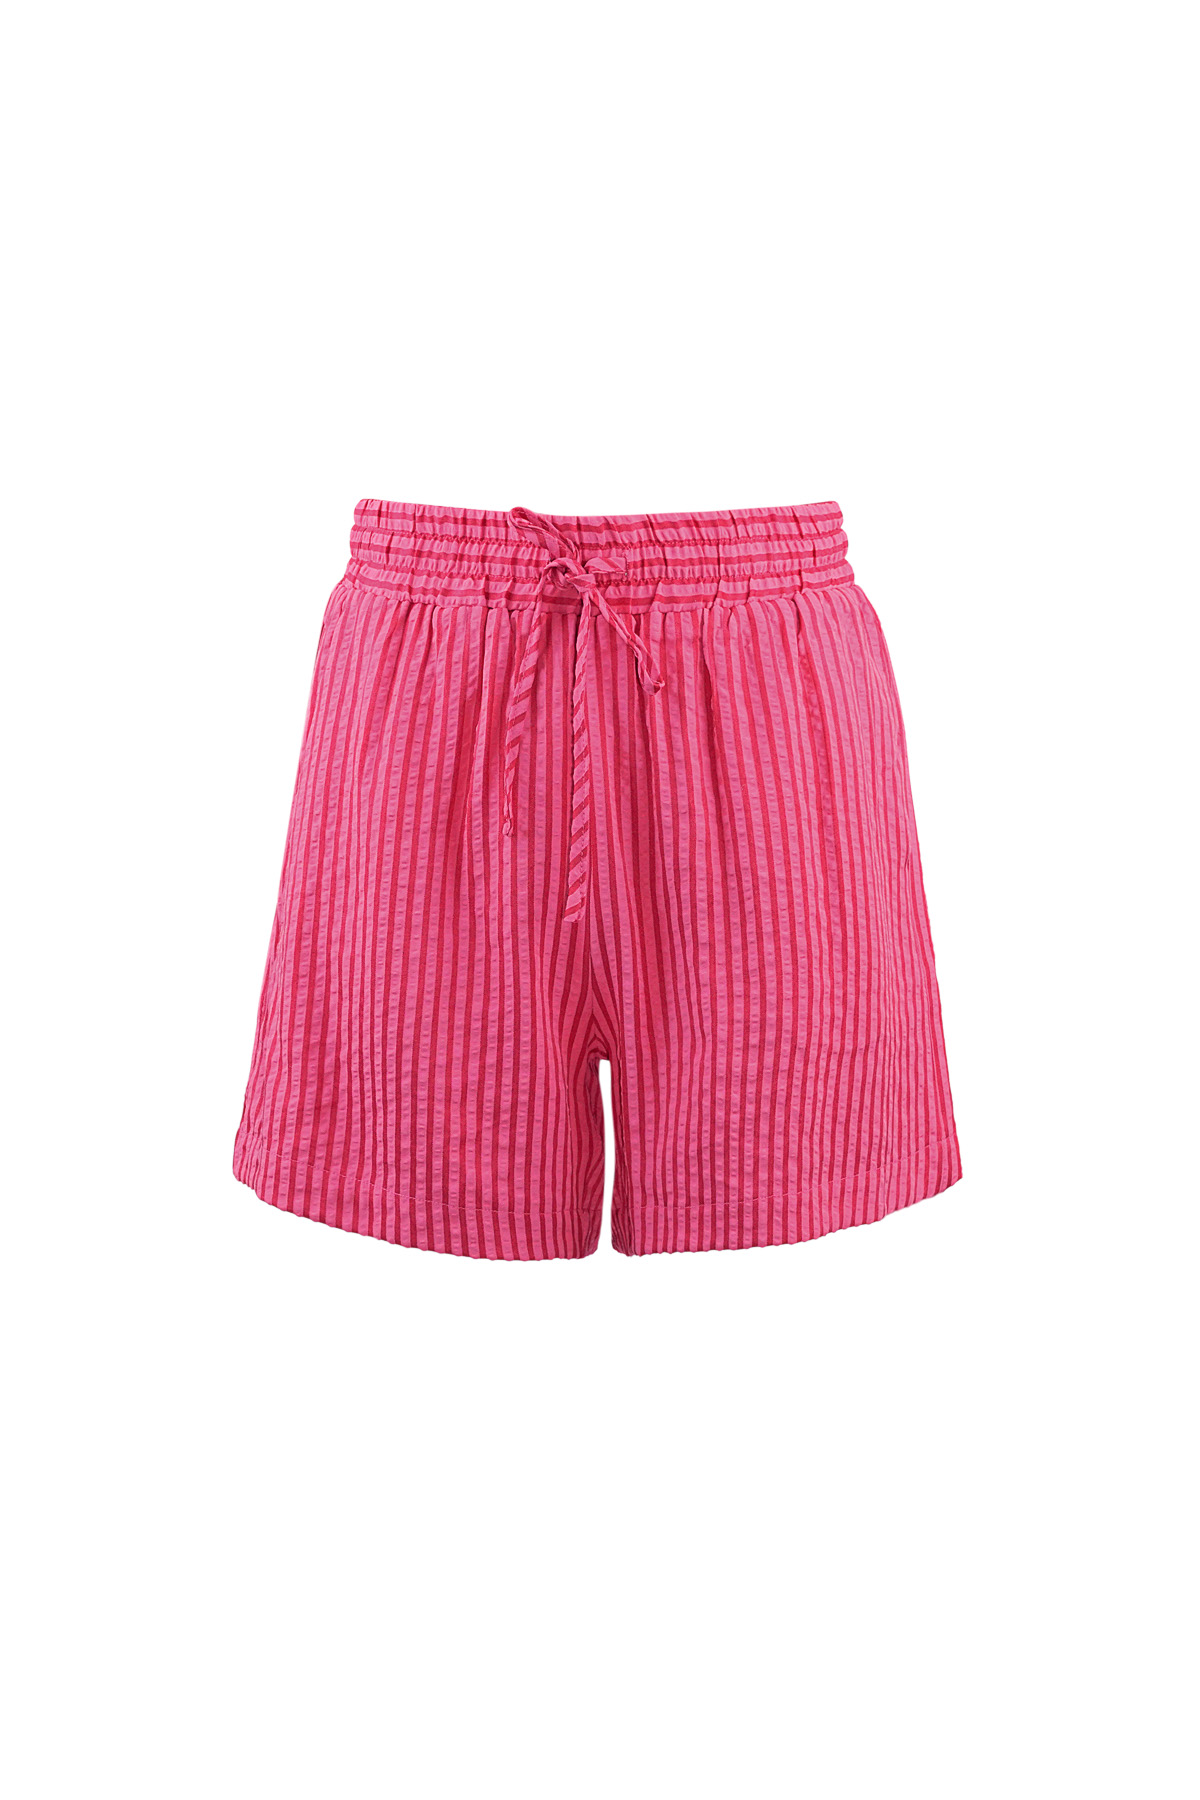 Striped shorts - red pink